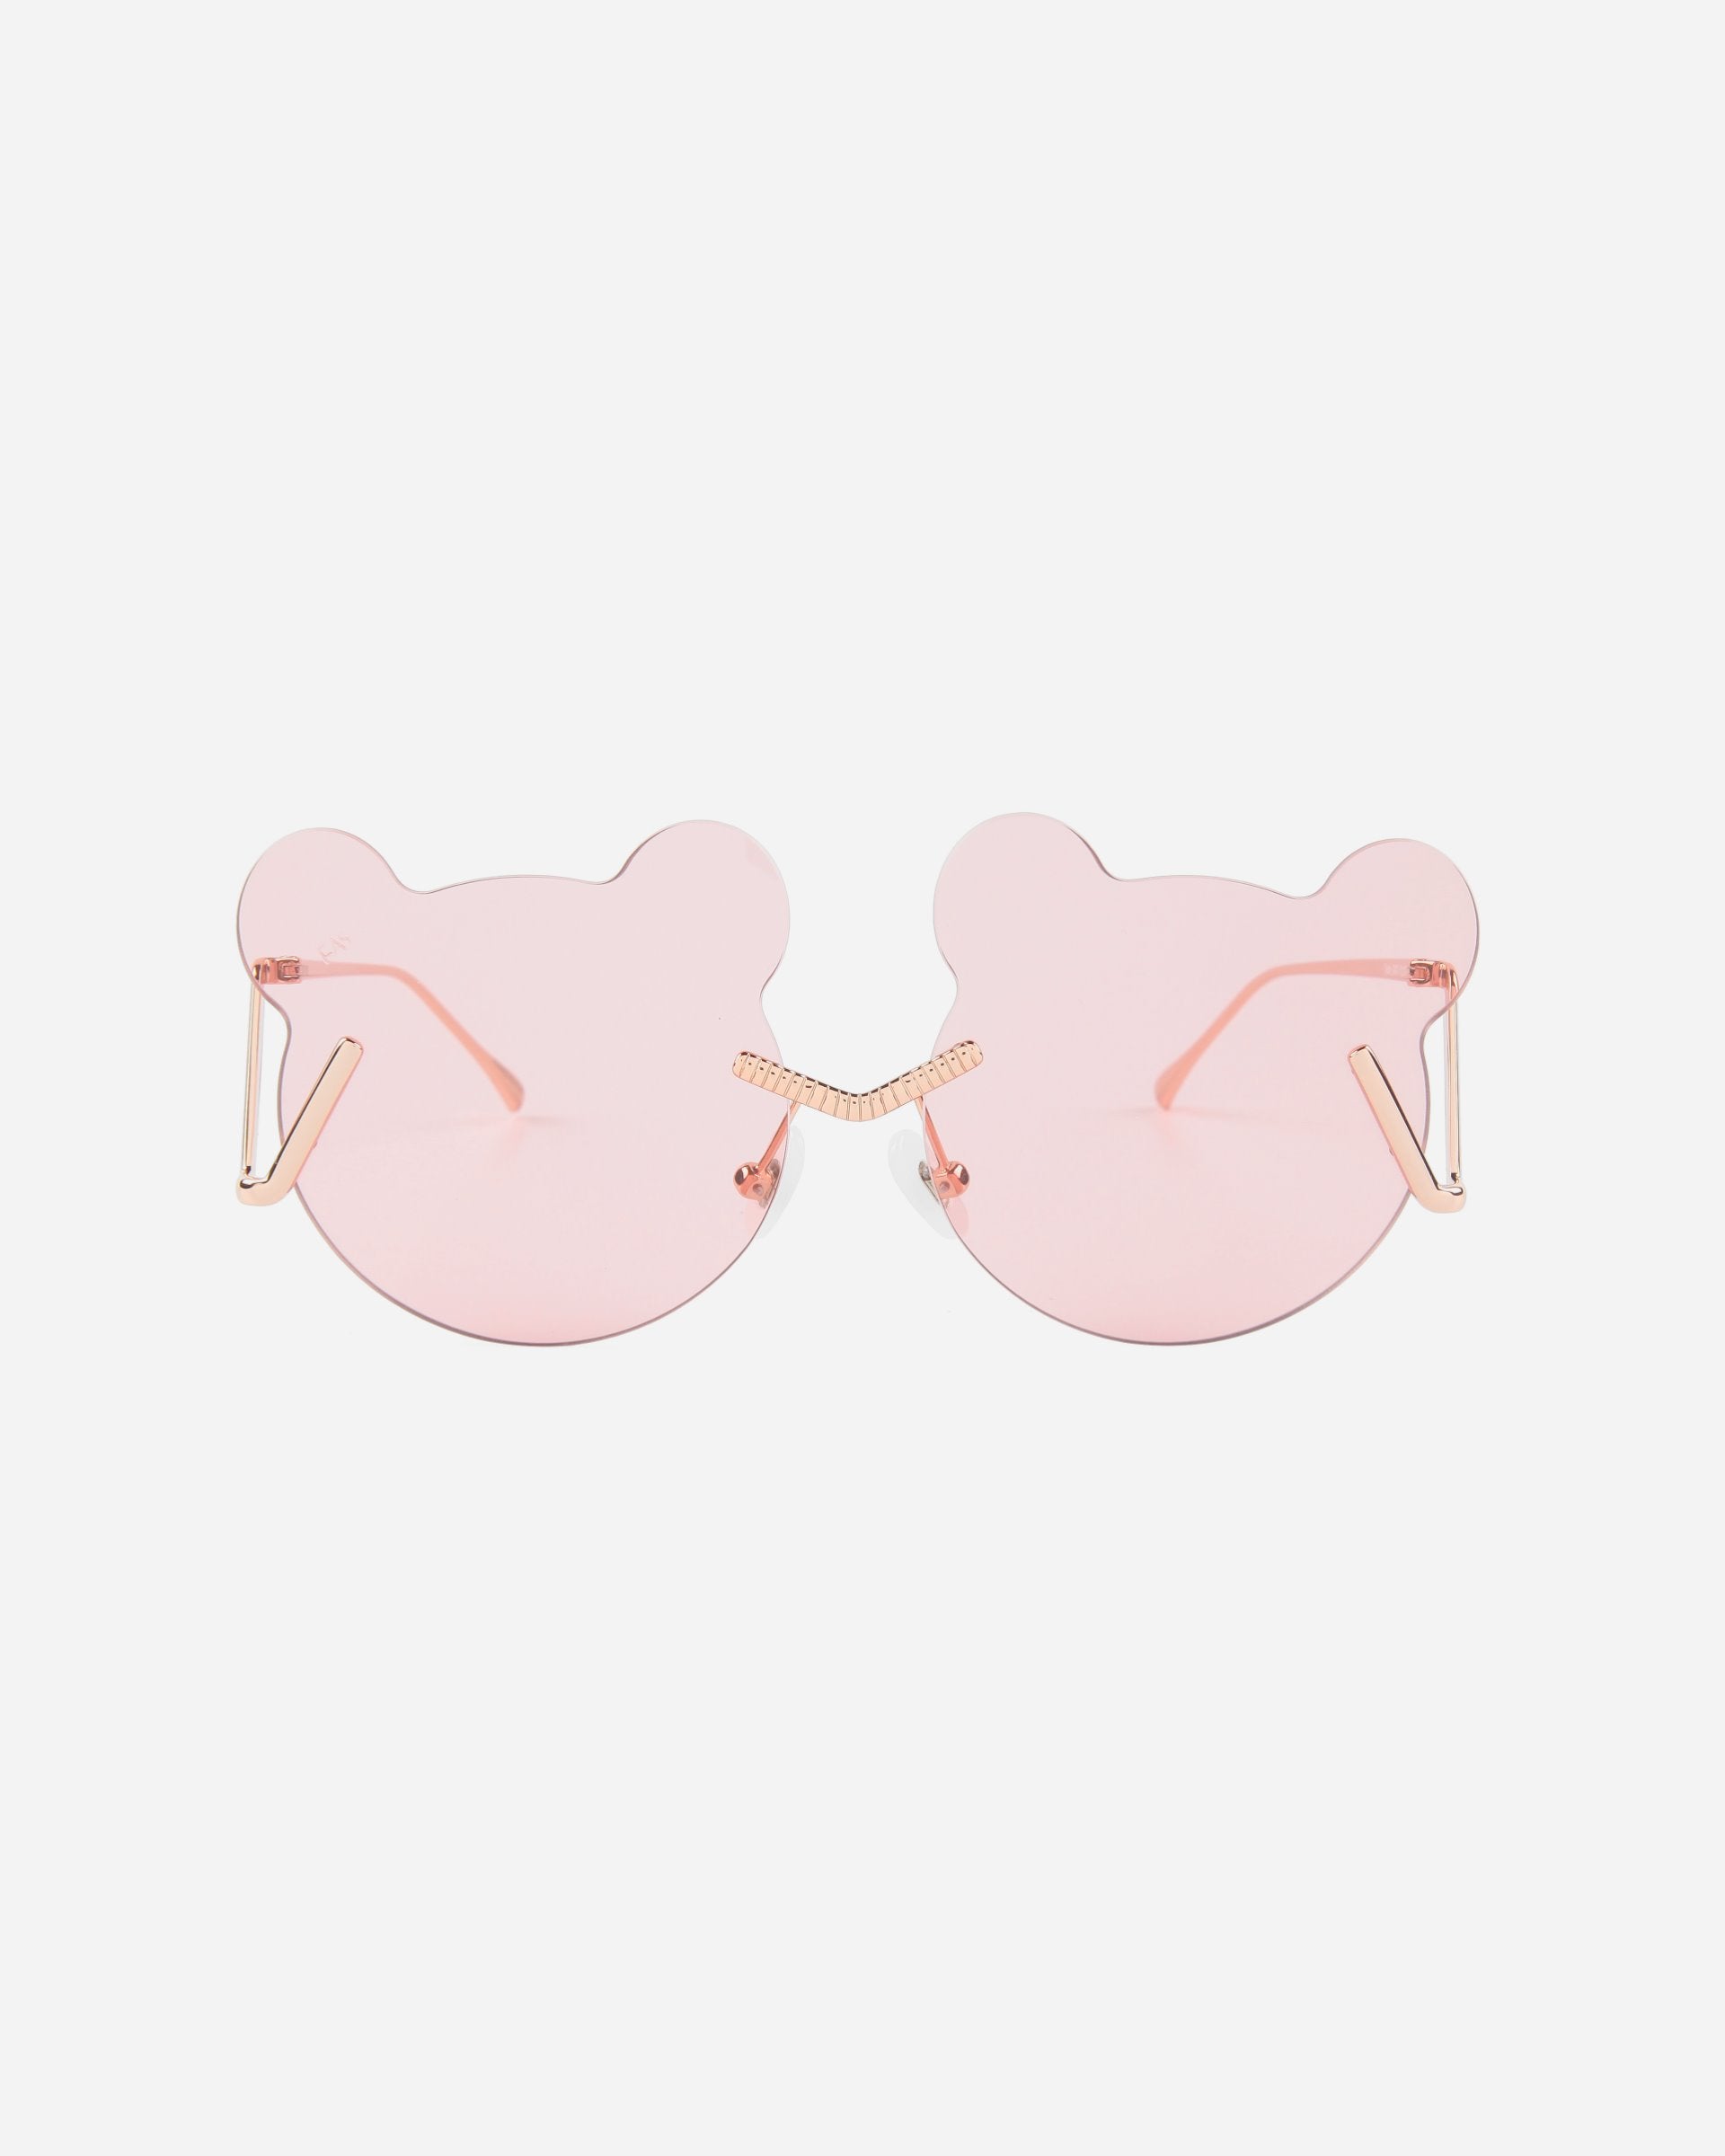 For Art&#39;s Sake® Teddy sunglasses with bear-shaped lenses, UV protection, and gold-colored arms made from stainless steel frames against a white background.